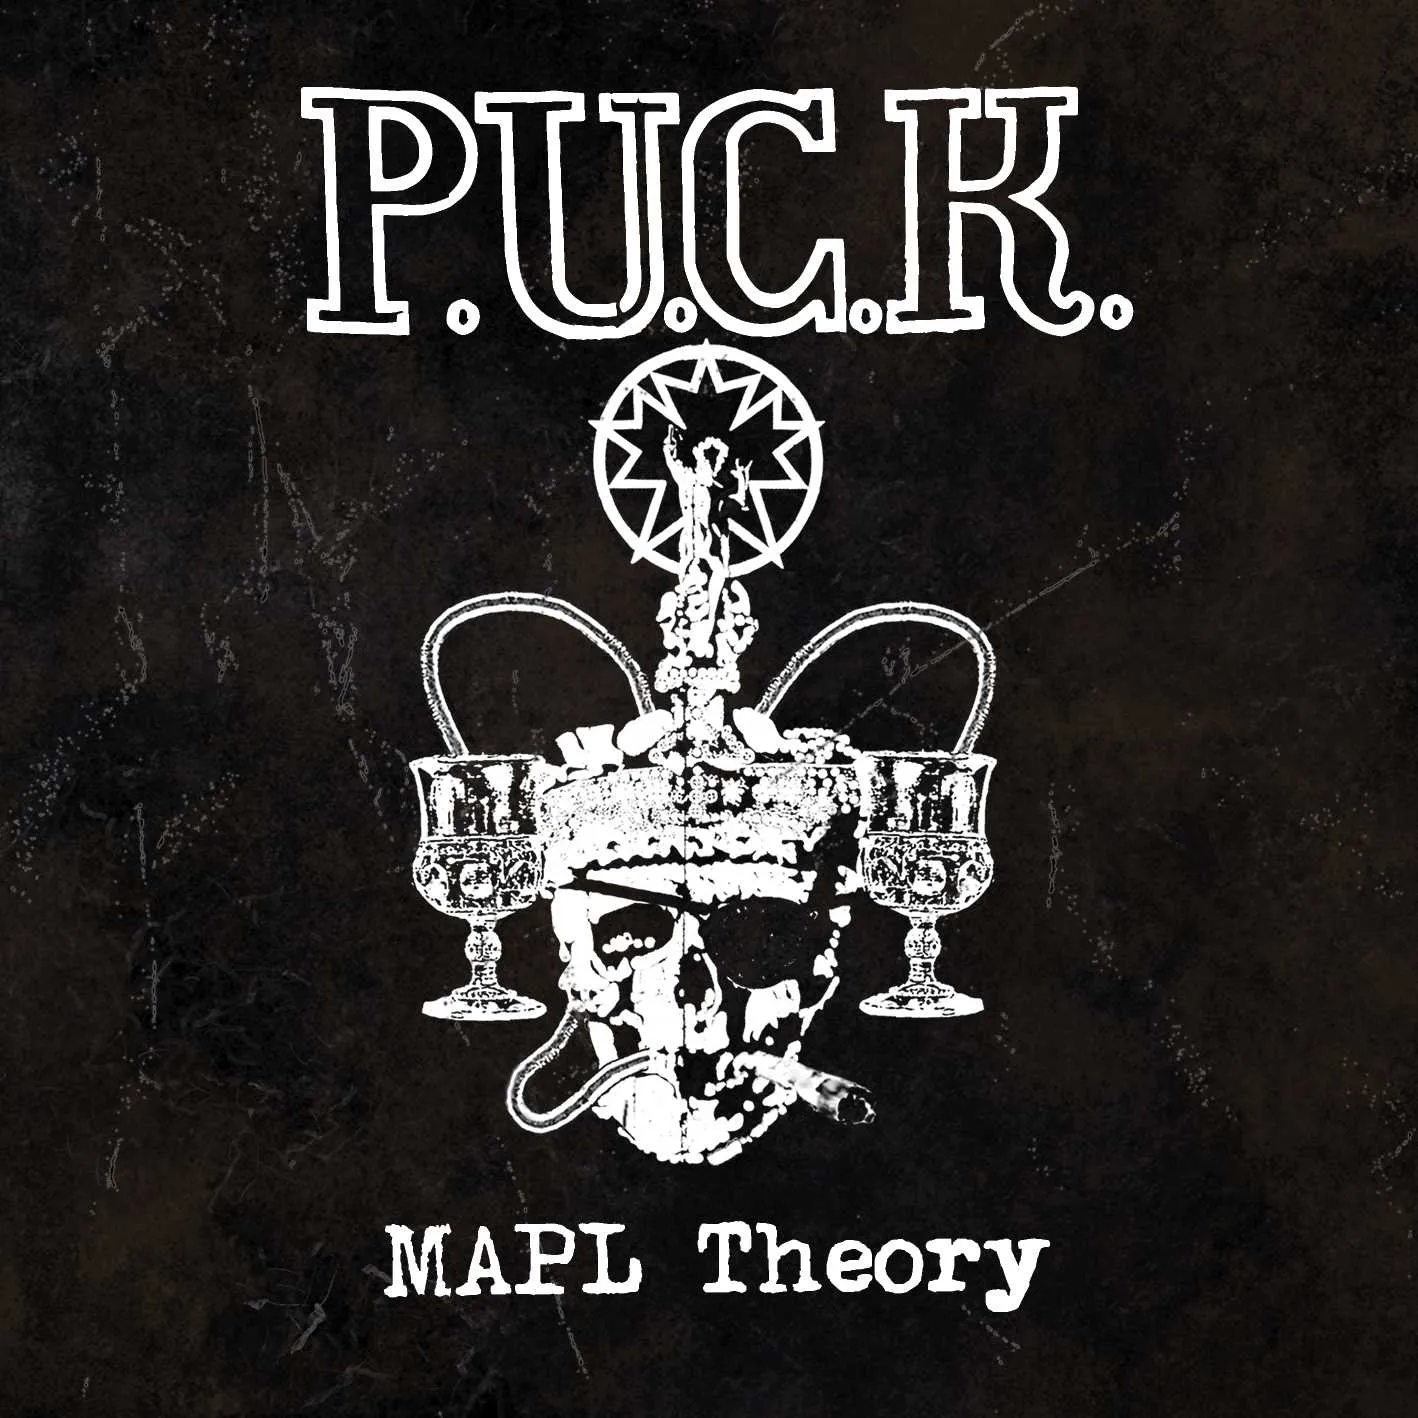 Album cover for “MAPL Theory” by P.U.C.K.